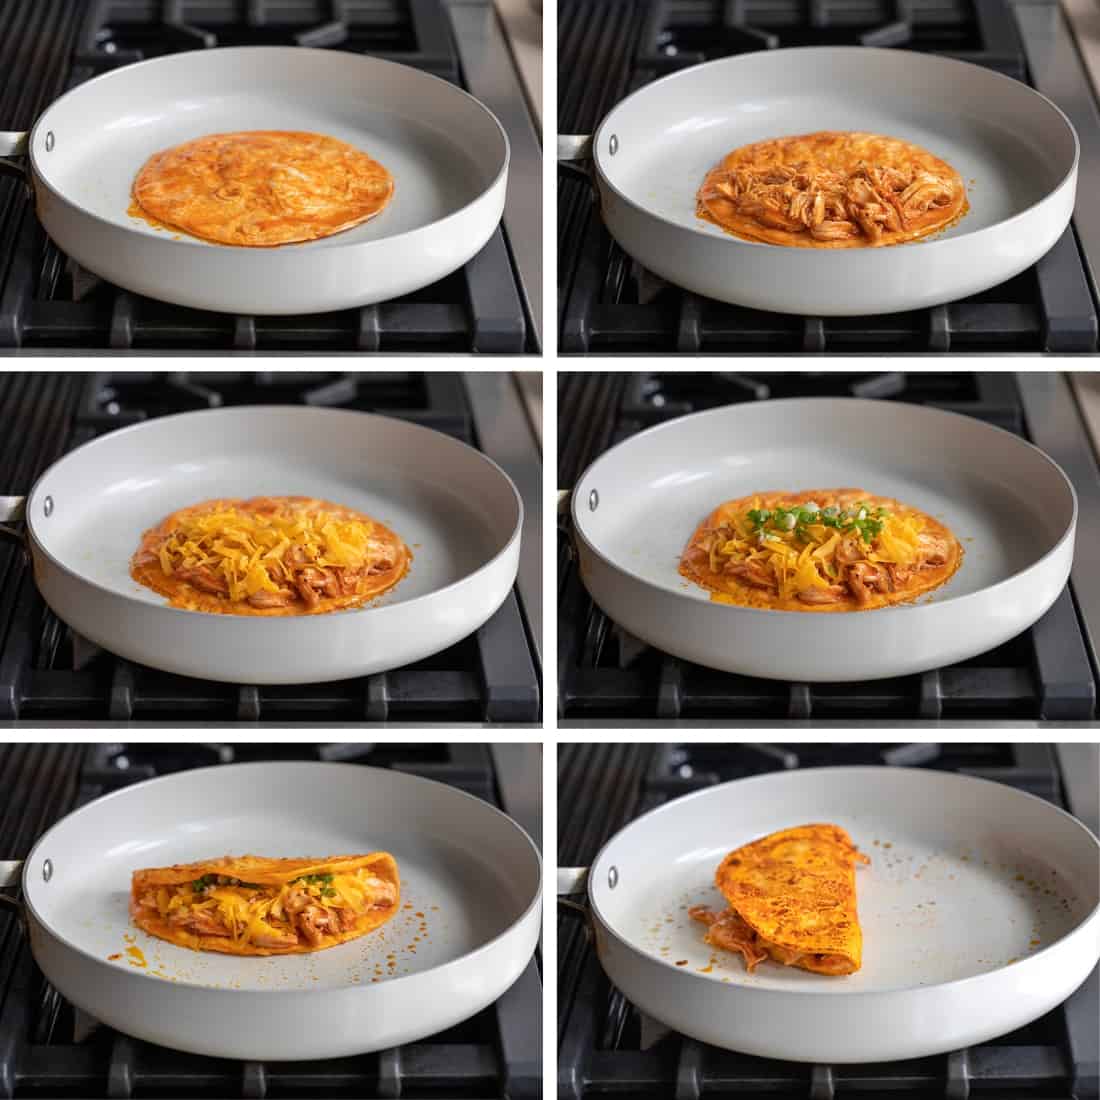 Steps for assembling a Buffalo Chicken Tacos in a pan starting with the soaked tortilla, chicken, cheese, green onion, then folding.